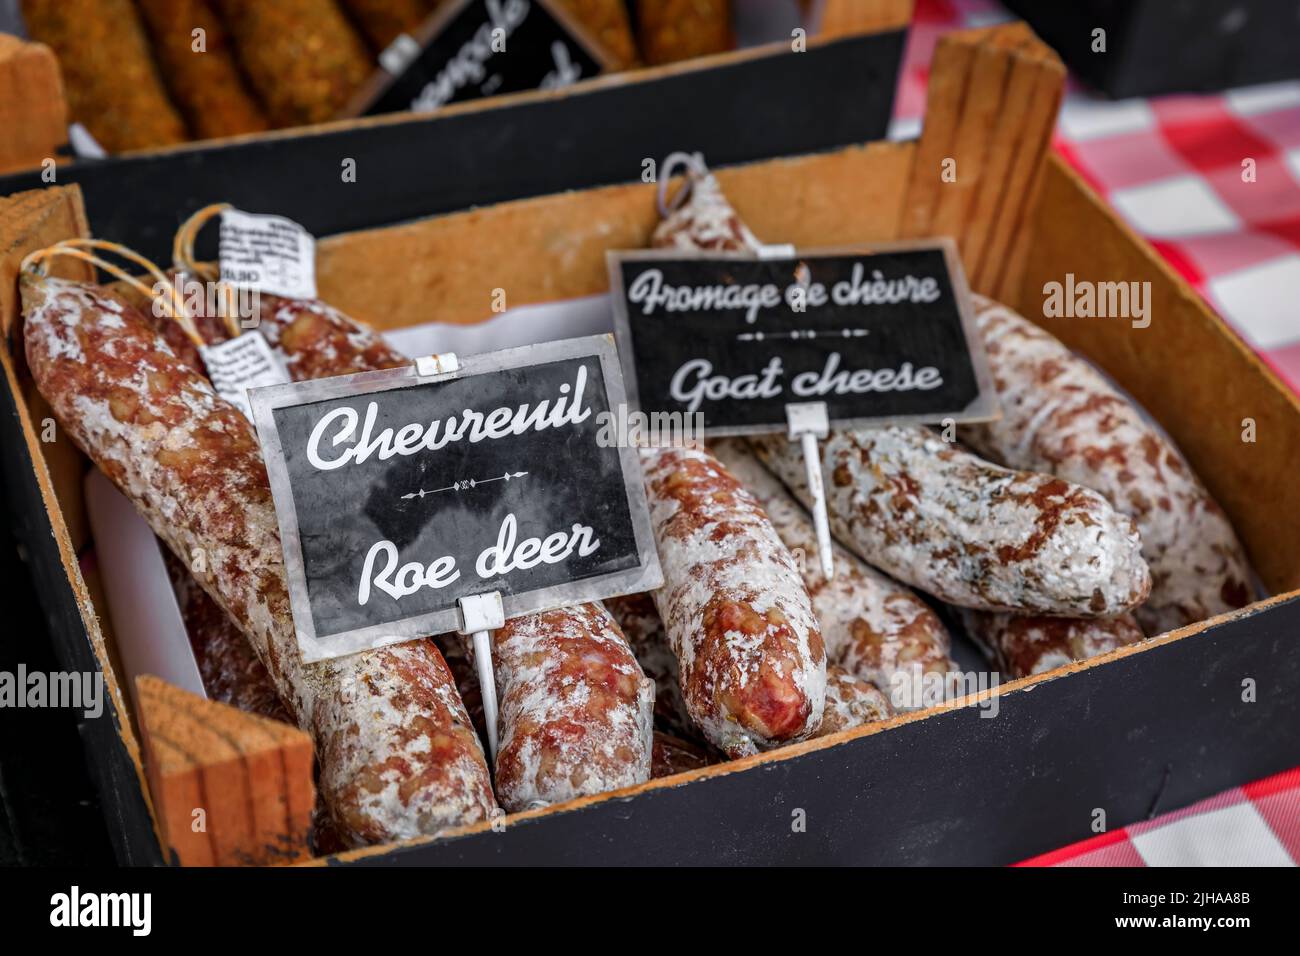 Deer and goat cheese sausage in a basket on a stand at a local farmers market Cours Saleya in Old Town, Vieille Ville in Nice, French Riviera, France Stock Photo